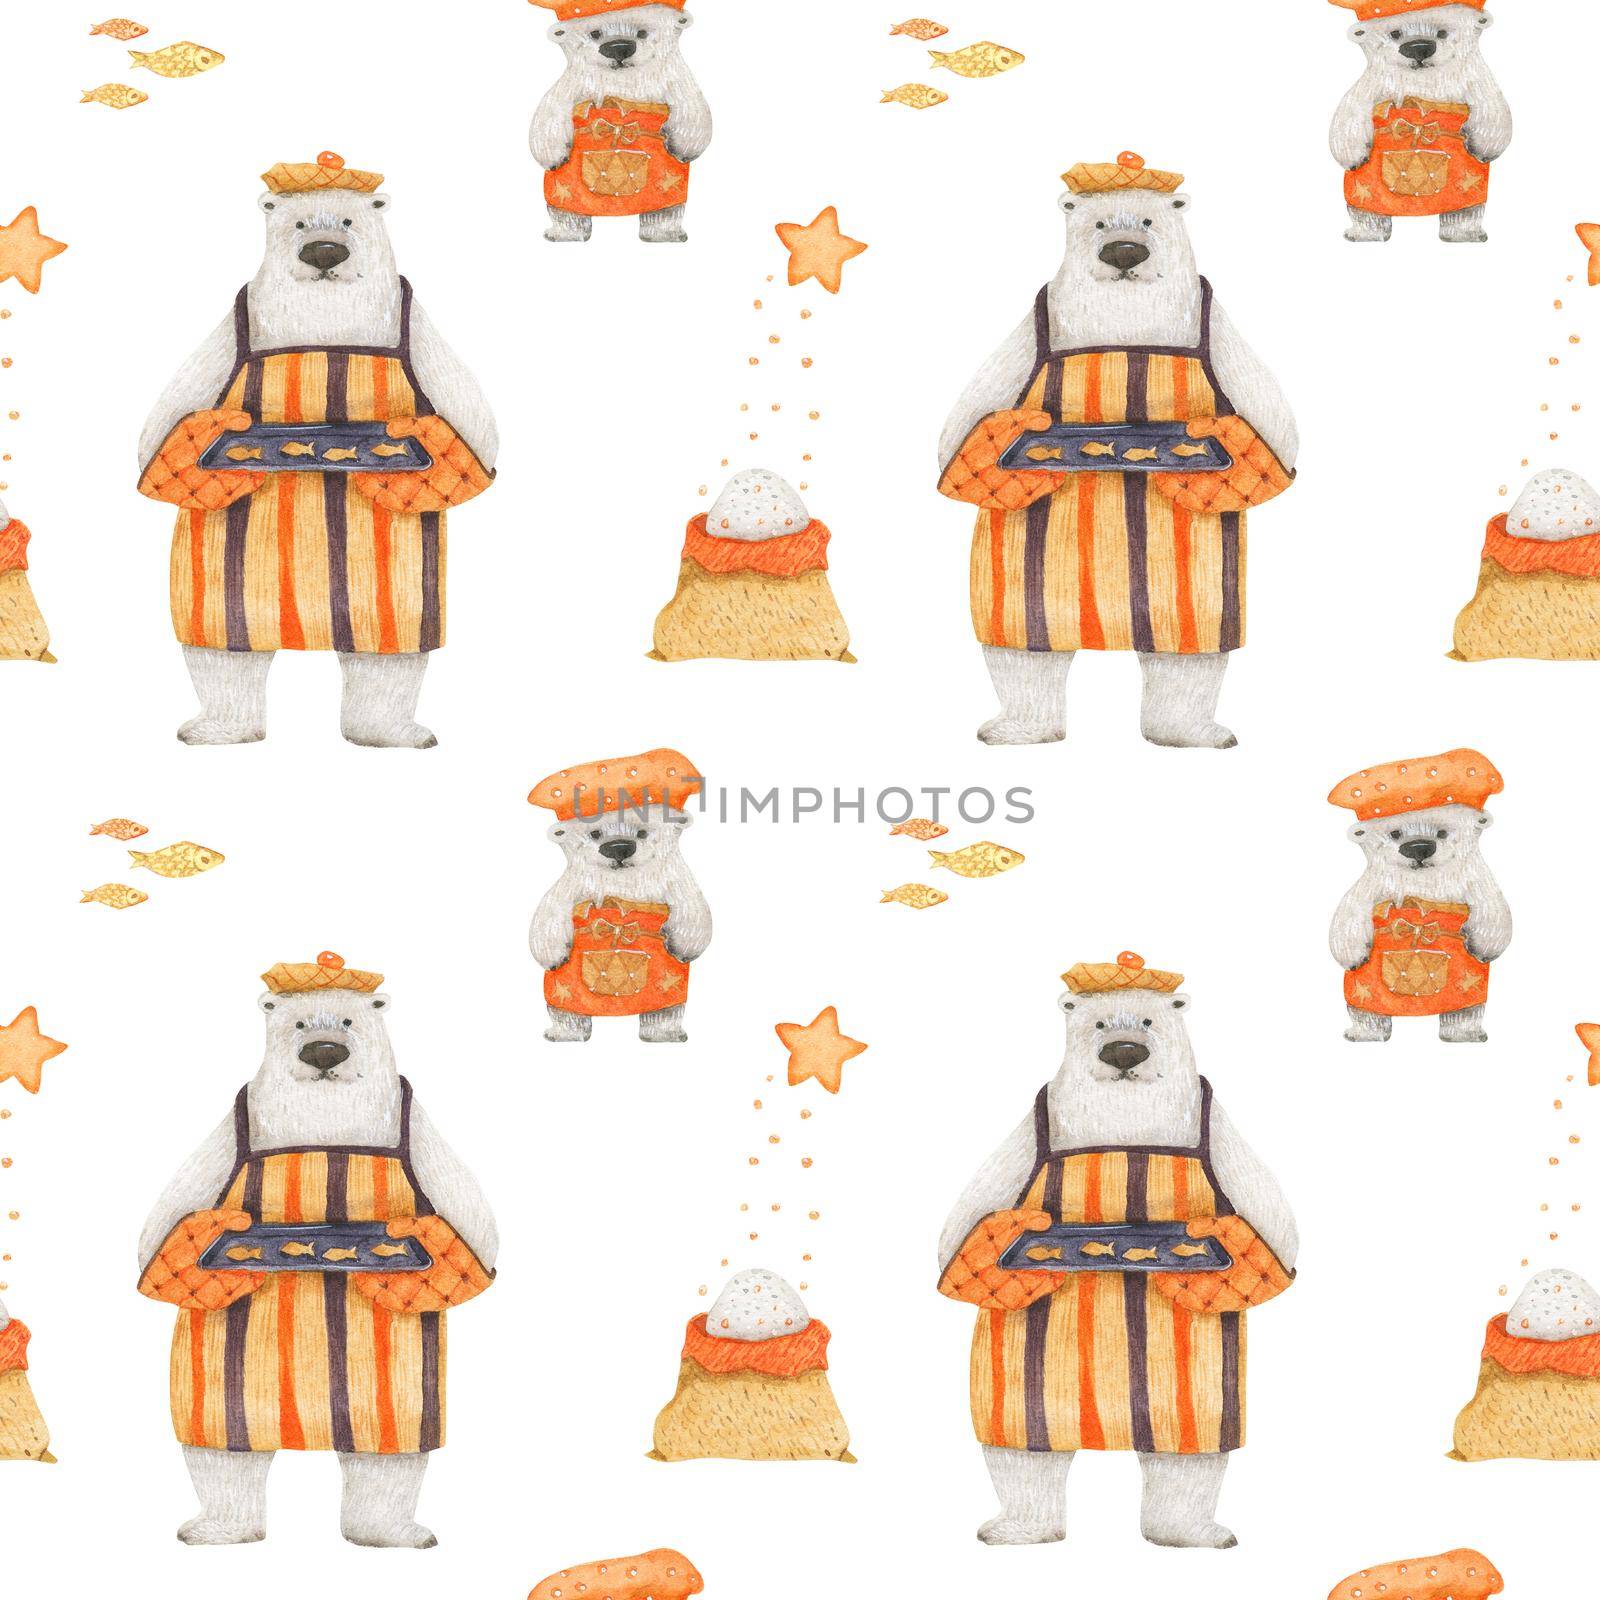 Polar bears baking homemede sugar cookies. Watercolor seamless patterns for textile, wrapping paper and any tiled design. White background, clipping path uncluded